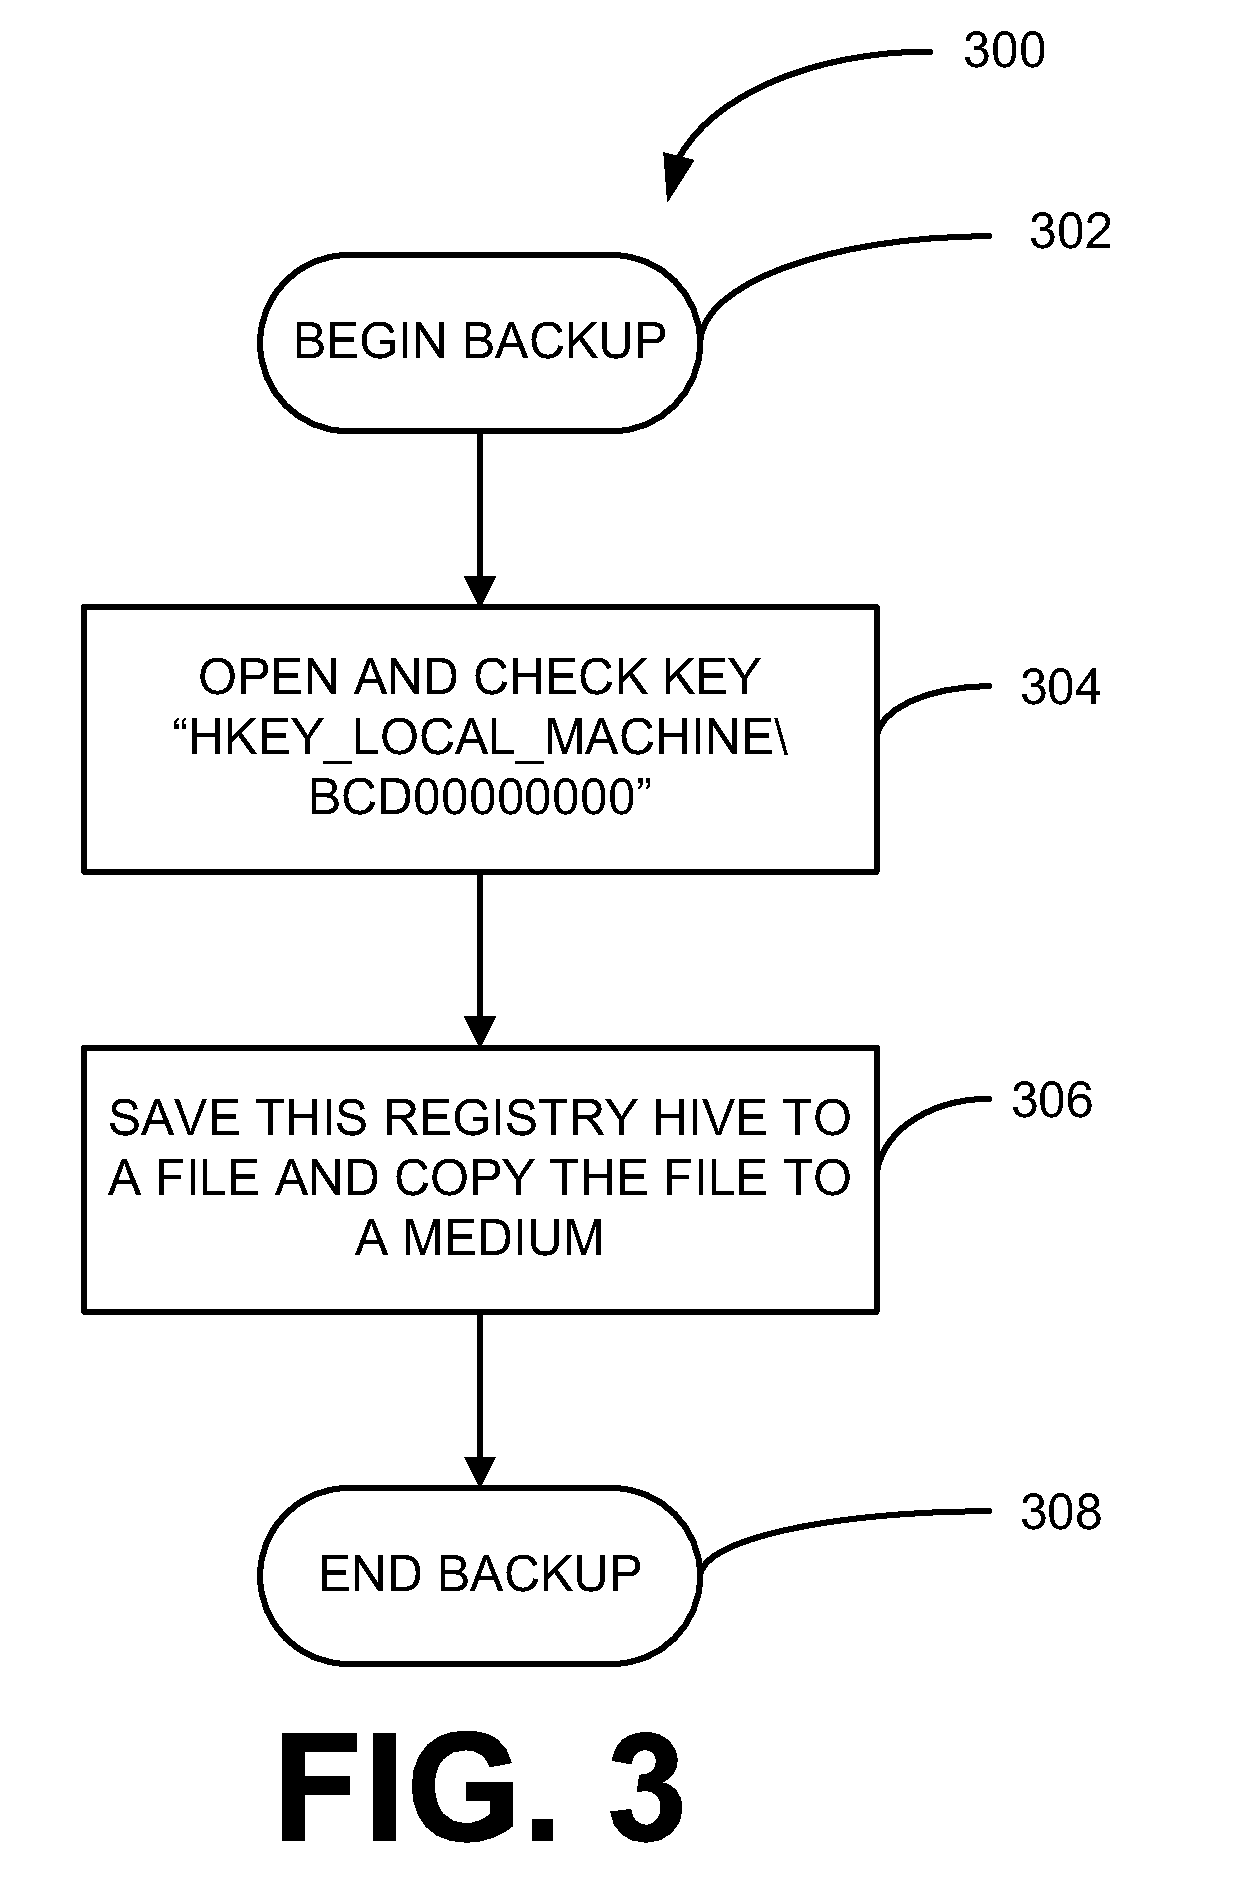 Backup and recovery of systems including boot configuration data in an extension firmware interface partition